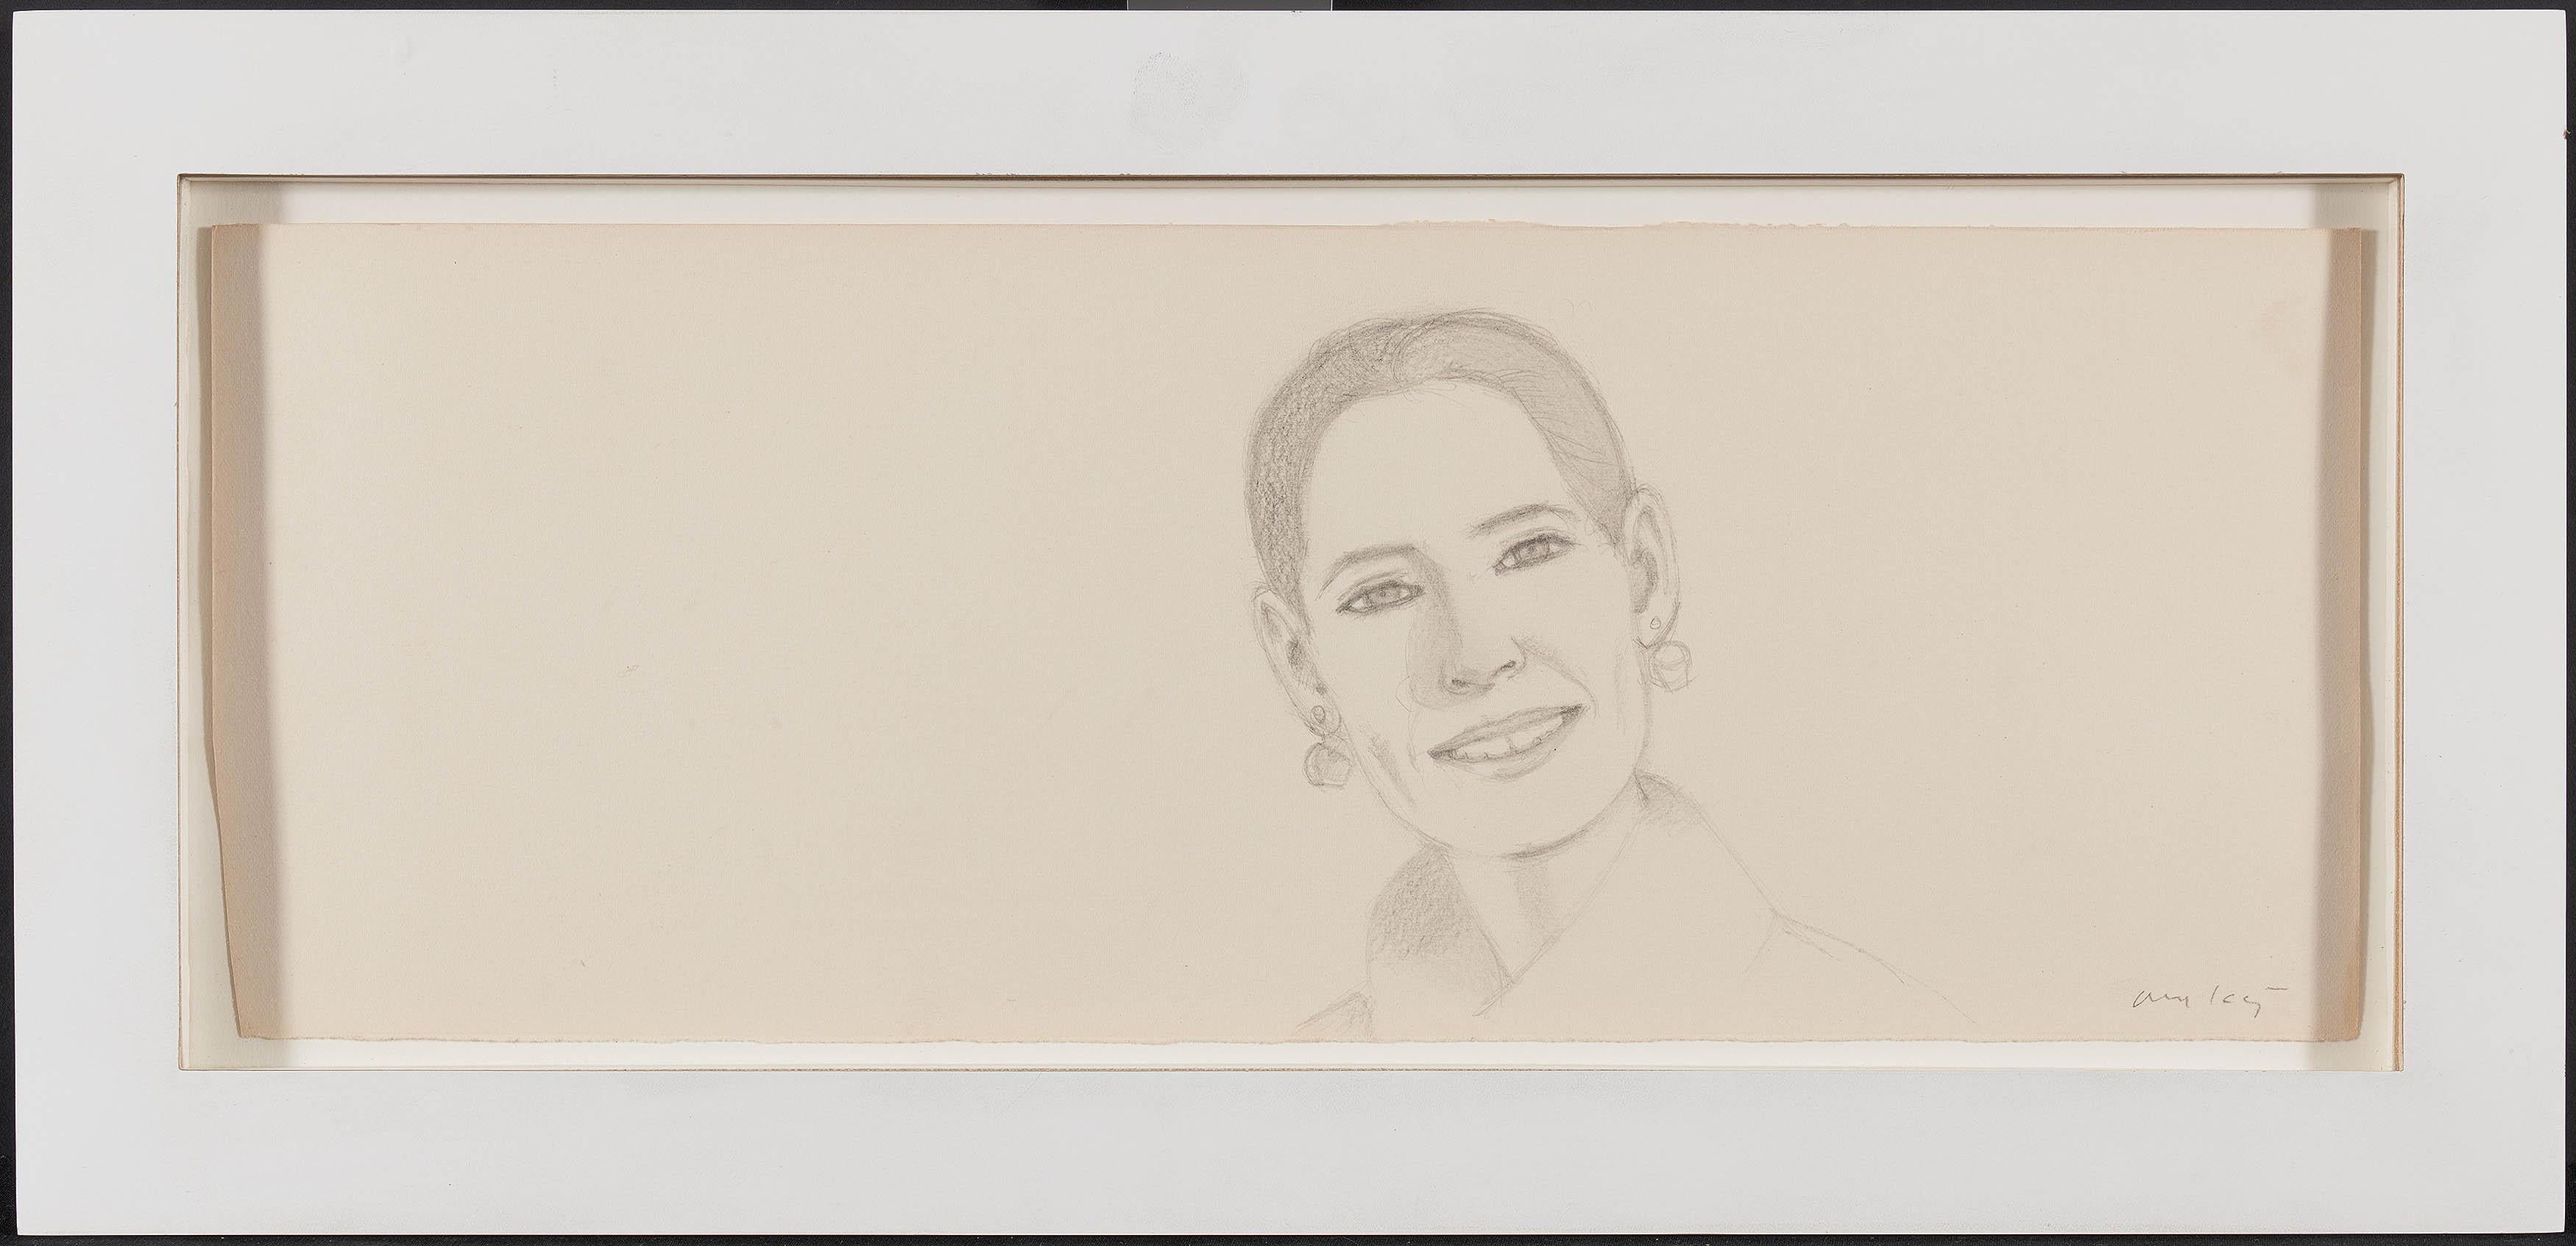 ALEX KATZ (1927-Present)

This Alex Katz 'Ursula' is a 1994 soft pencil drawing on vellum paper. This original piece is signed 'Alex Katz', previously acquired from Marlborough Gallery, New York. It is framed and in excellent condition. 
